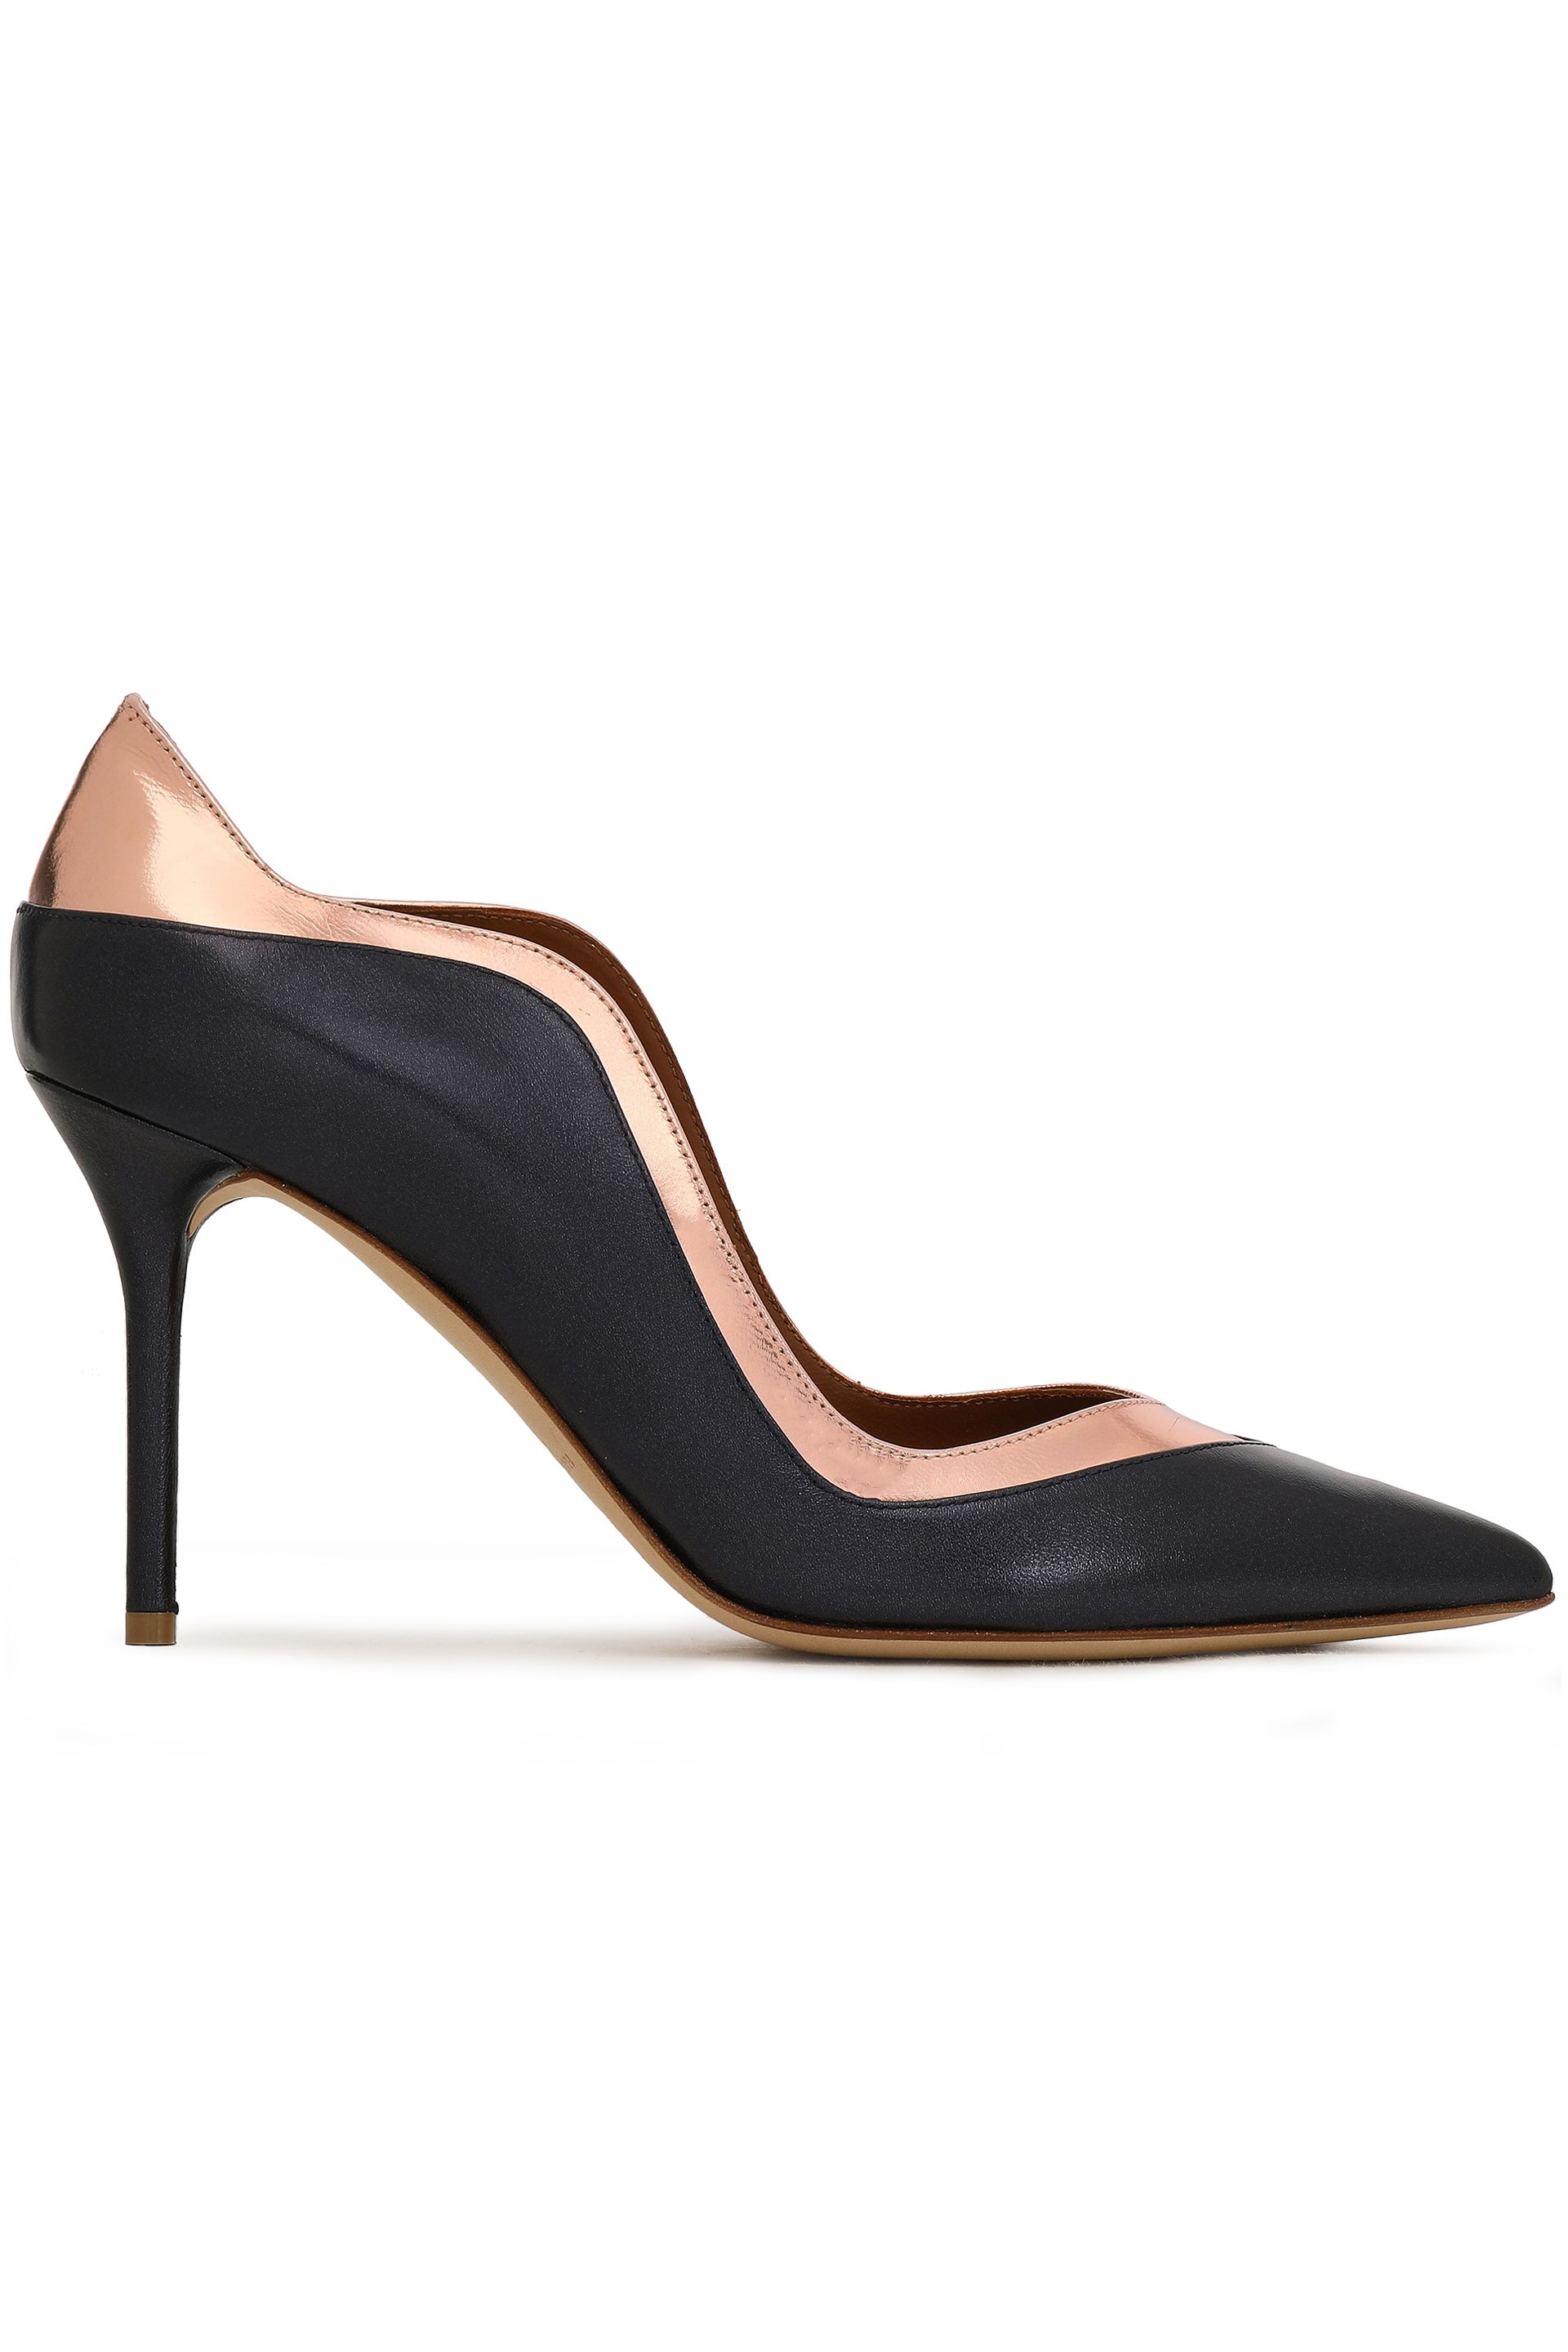 Malone Souliers | Sale up to 70% off | AU | THE OUTNET